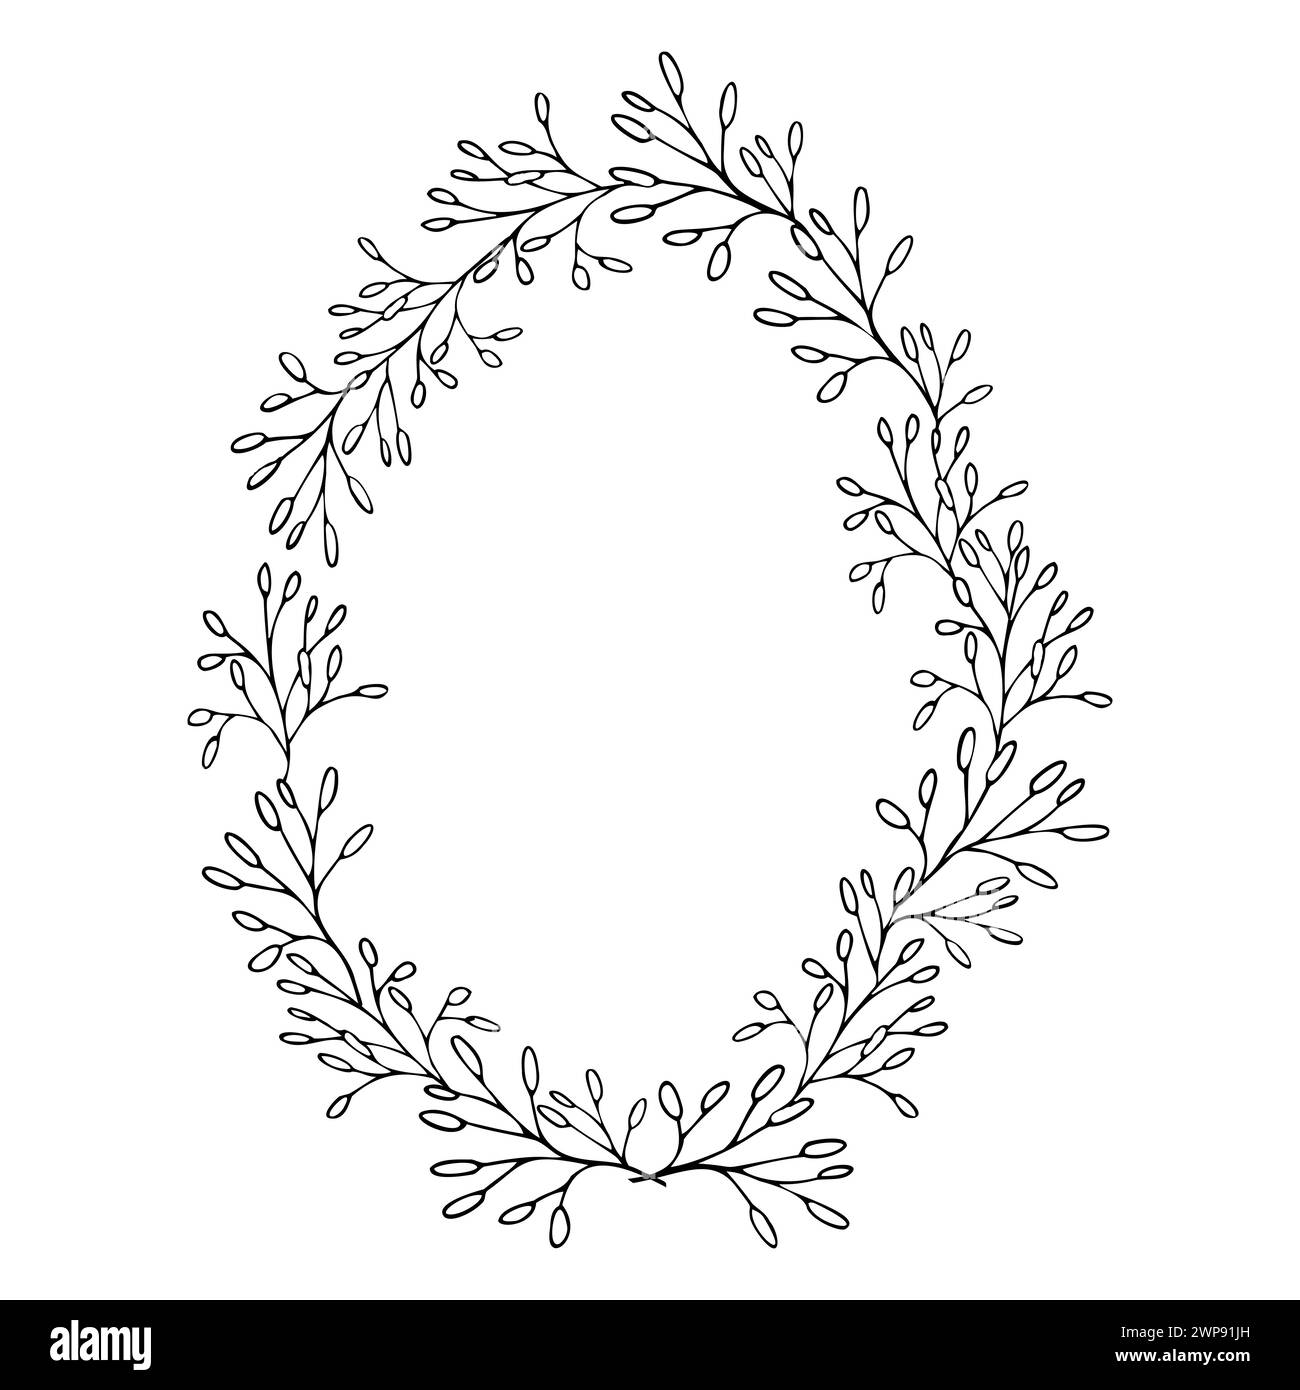 Line art spring flower Easter egg, hand drawn floral elements. Vector illustrations for card or invitations, coloring book. Stock Vector